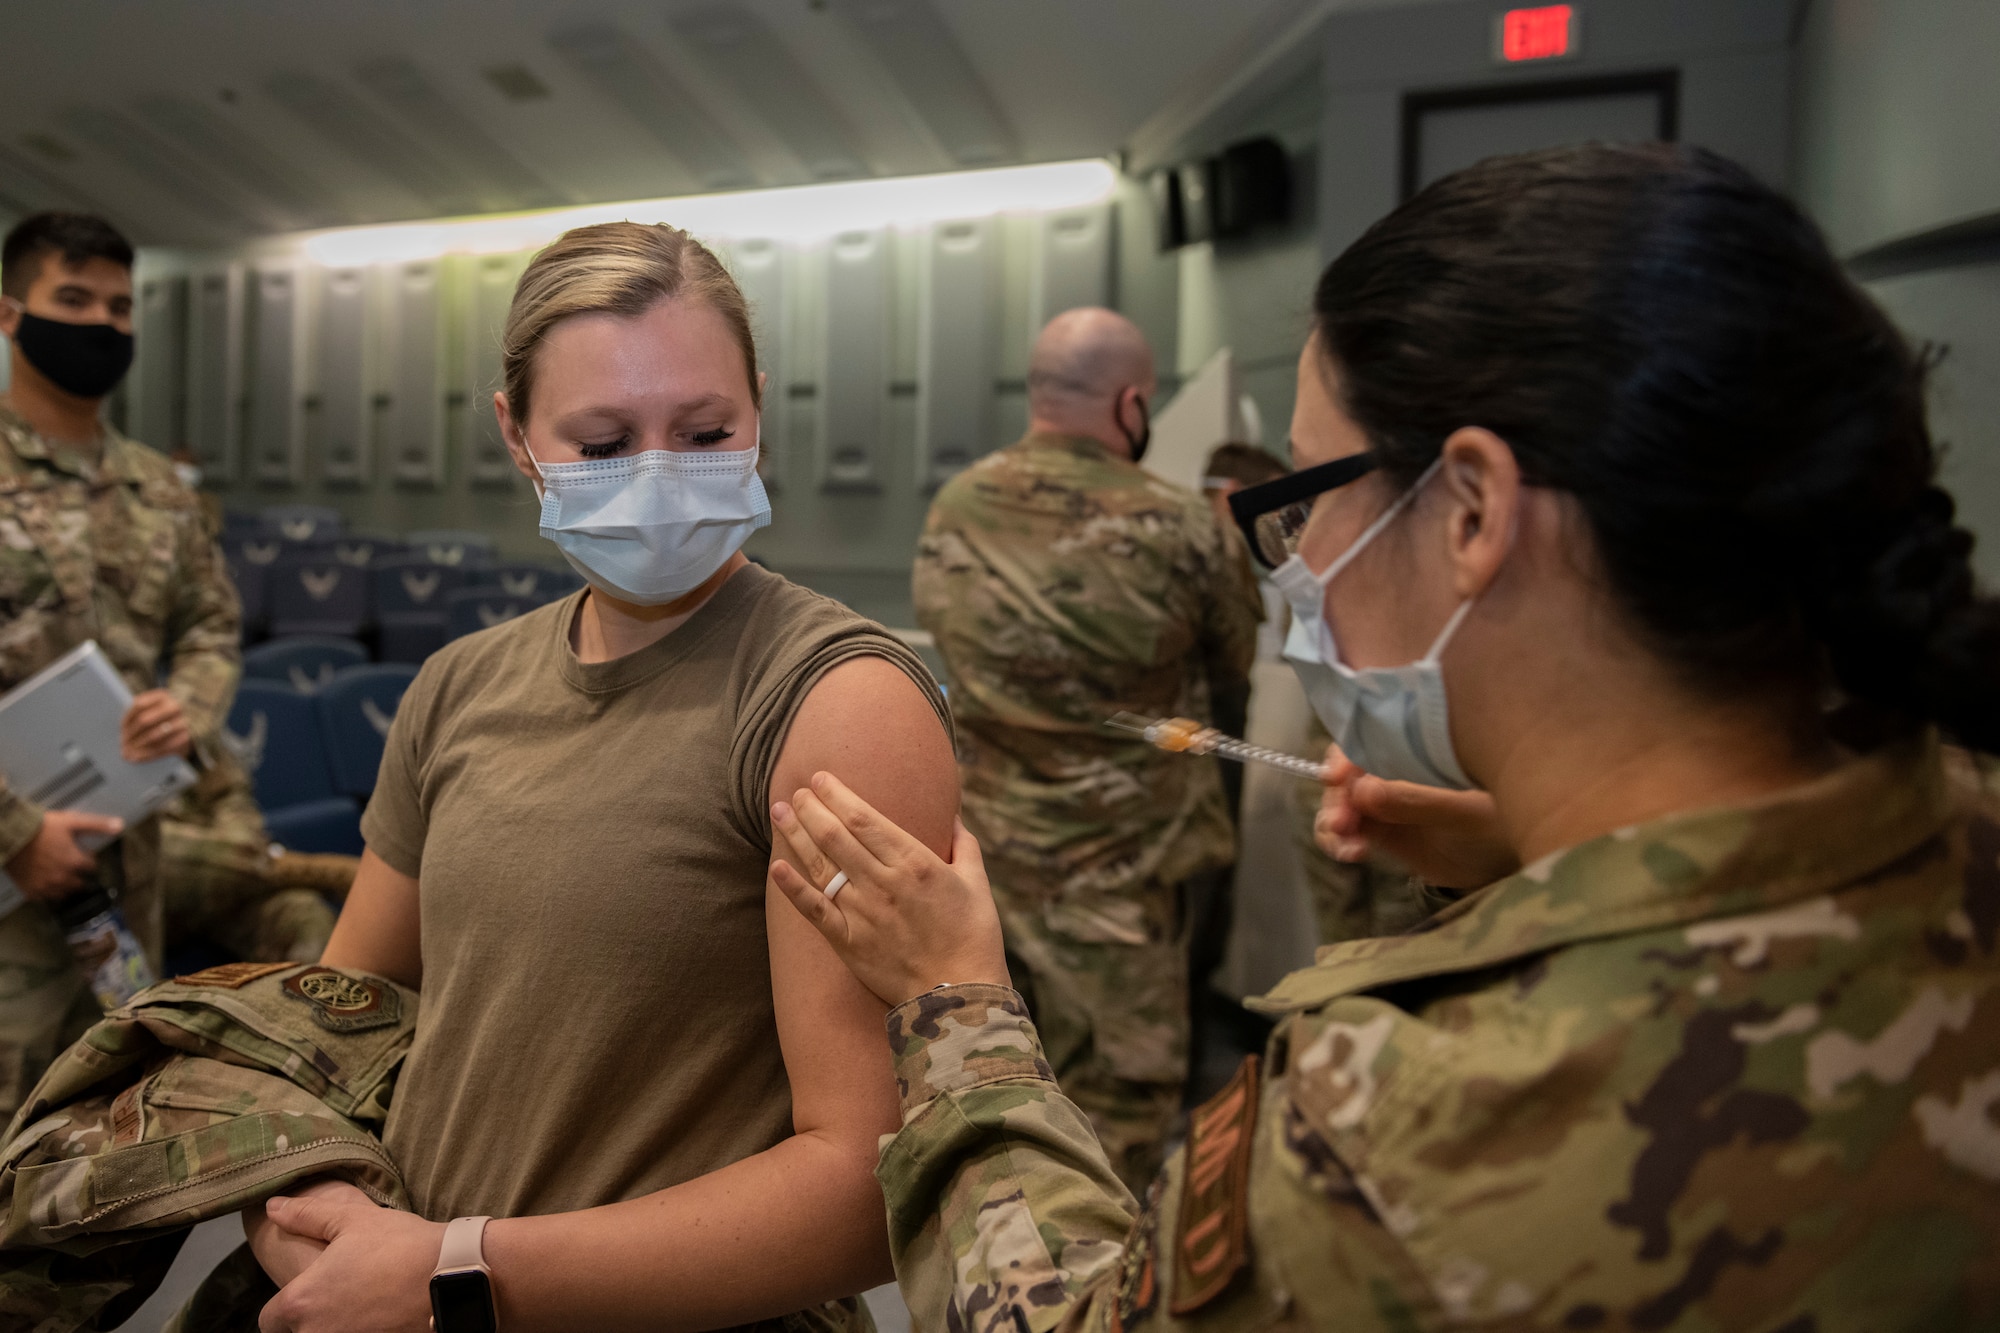 U.S. Air Force 1st Lt. Fanny Perez, 60th Inpatient Squadron intensive care unit nurse, injects 1st Lt. Shelby Hannigan, 60th Inpatient Squadron critical care nurse, with the COVID-19 vaccine Dec. 22, 2020, at Travis Air Force Base, California. Perez was among the first Airmen at Travis AFB to receive the vaccine. Members of the 60th Medical Group were tasked to support local hospitals in Southern California and assist with pandemic relief efforts. David Grant U.S. Air Force Medical Center is the largest Air Force medical facility and provides care to more than 276,000 Department of Defense and Veteran Affairs eligible beneficiaries. Essential medical personnel from the 60th Medical Group were the first to receive the vaccine at Travis AFB. (U.S. Air Force photo by Senior Airman Cameron Otte)